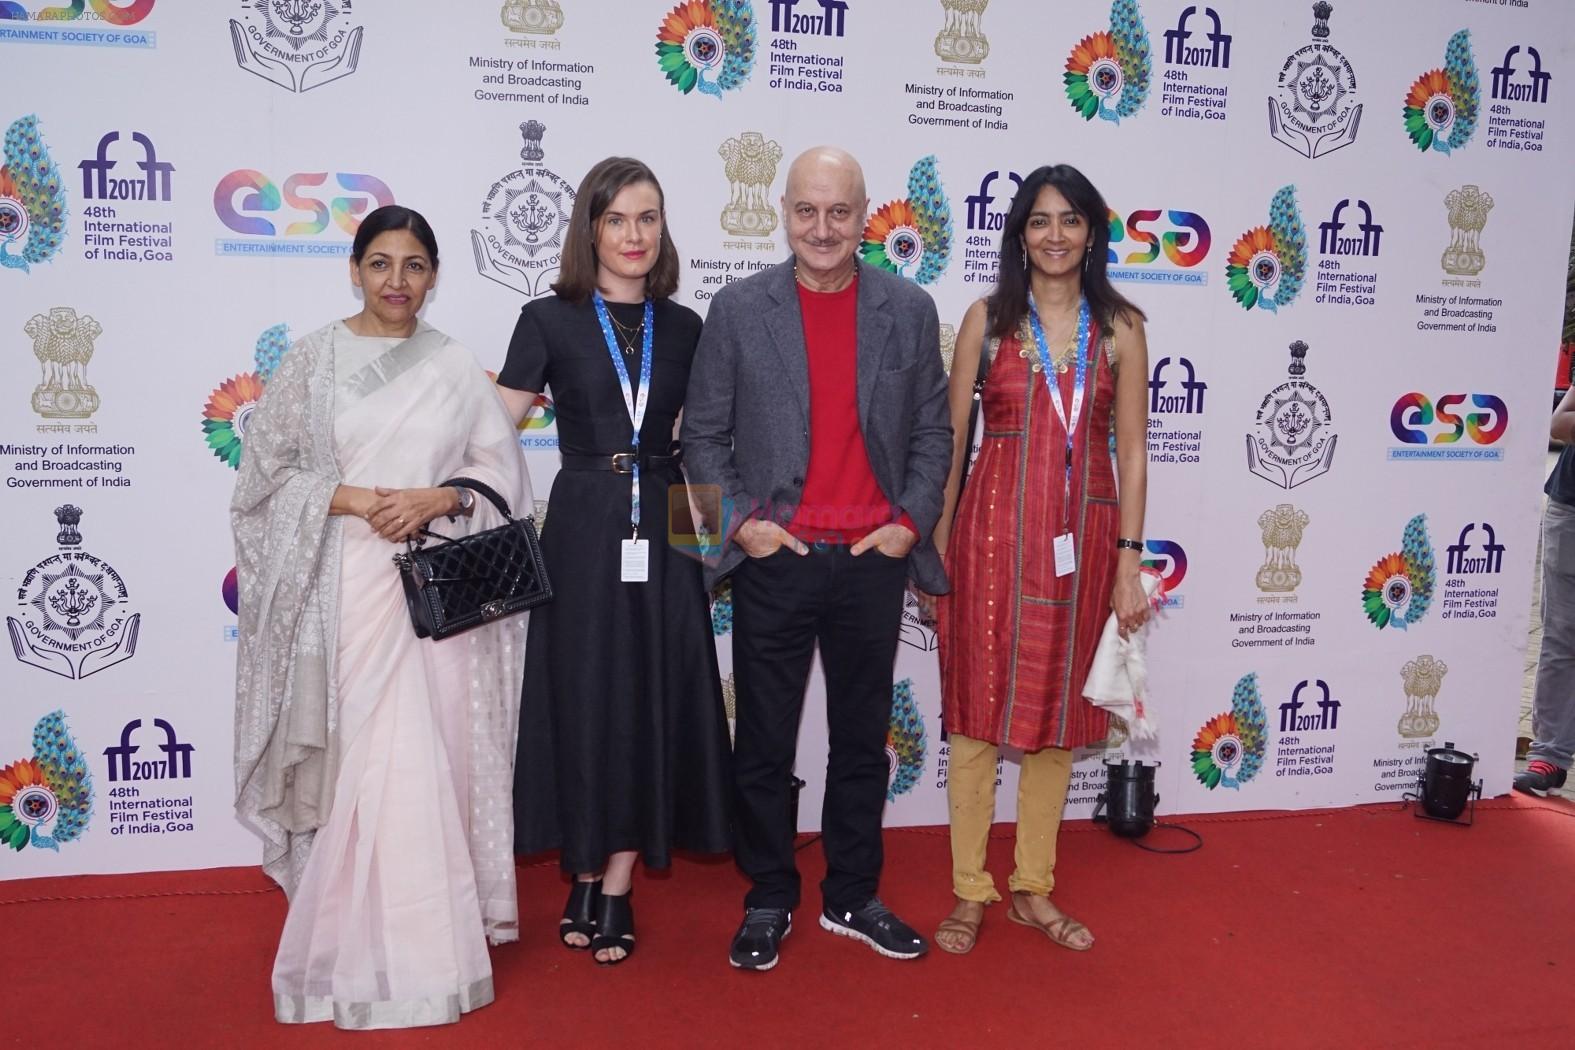 Anupam Kher, Deepti Naval At Red Carpet For Film CHUTNEY At IFFI 2017 on 25th Nov 2017